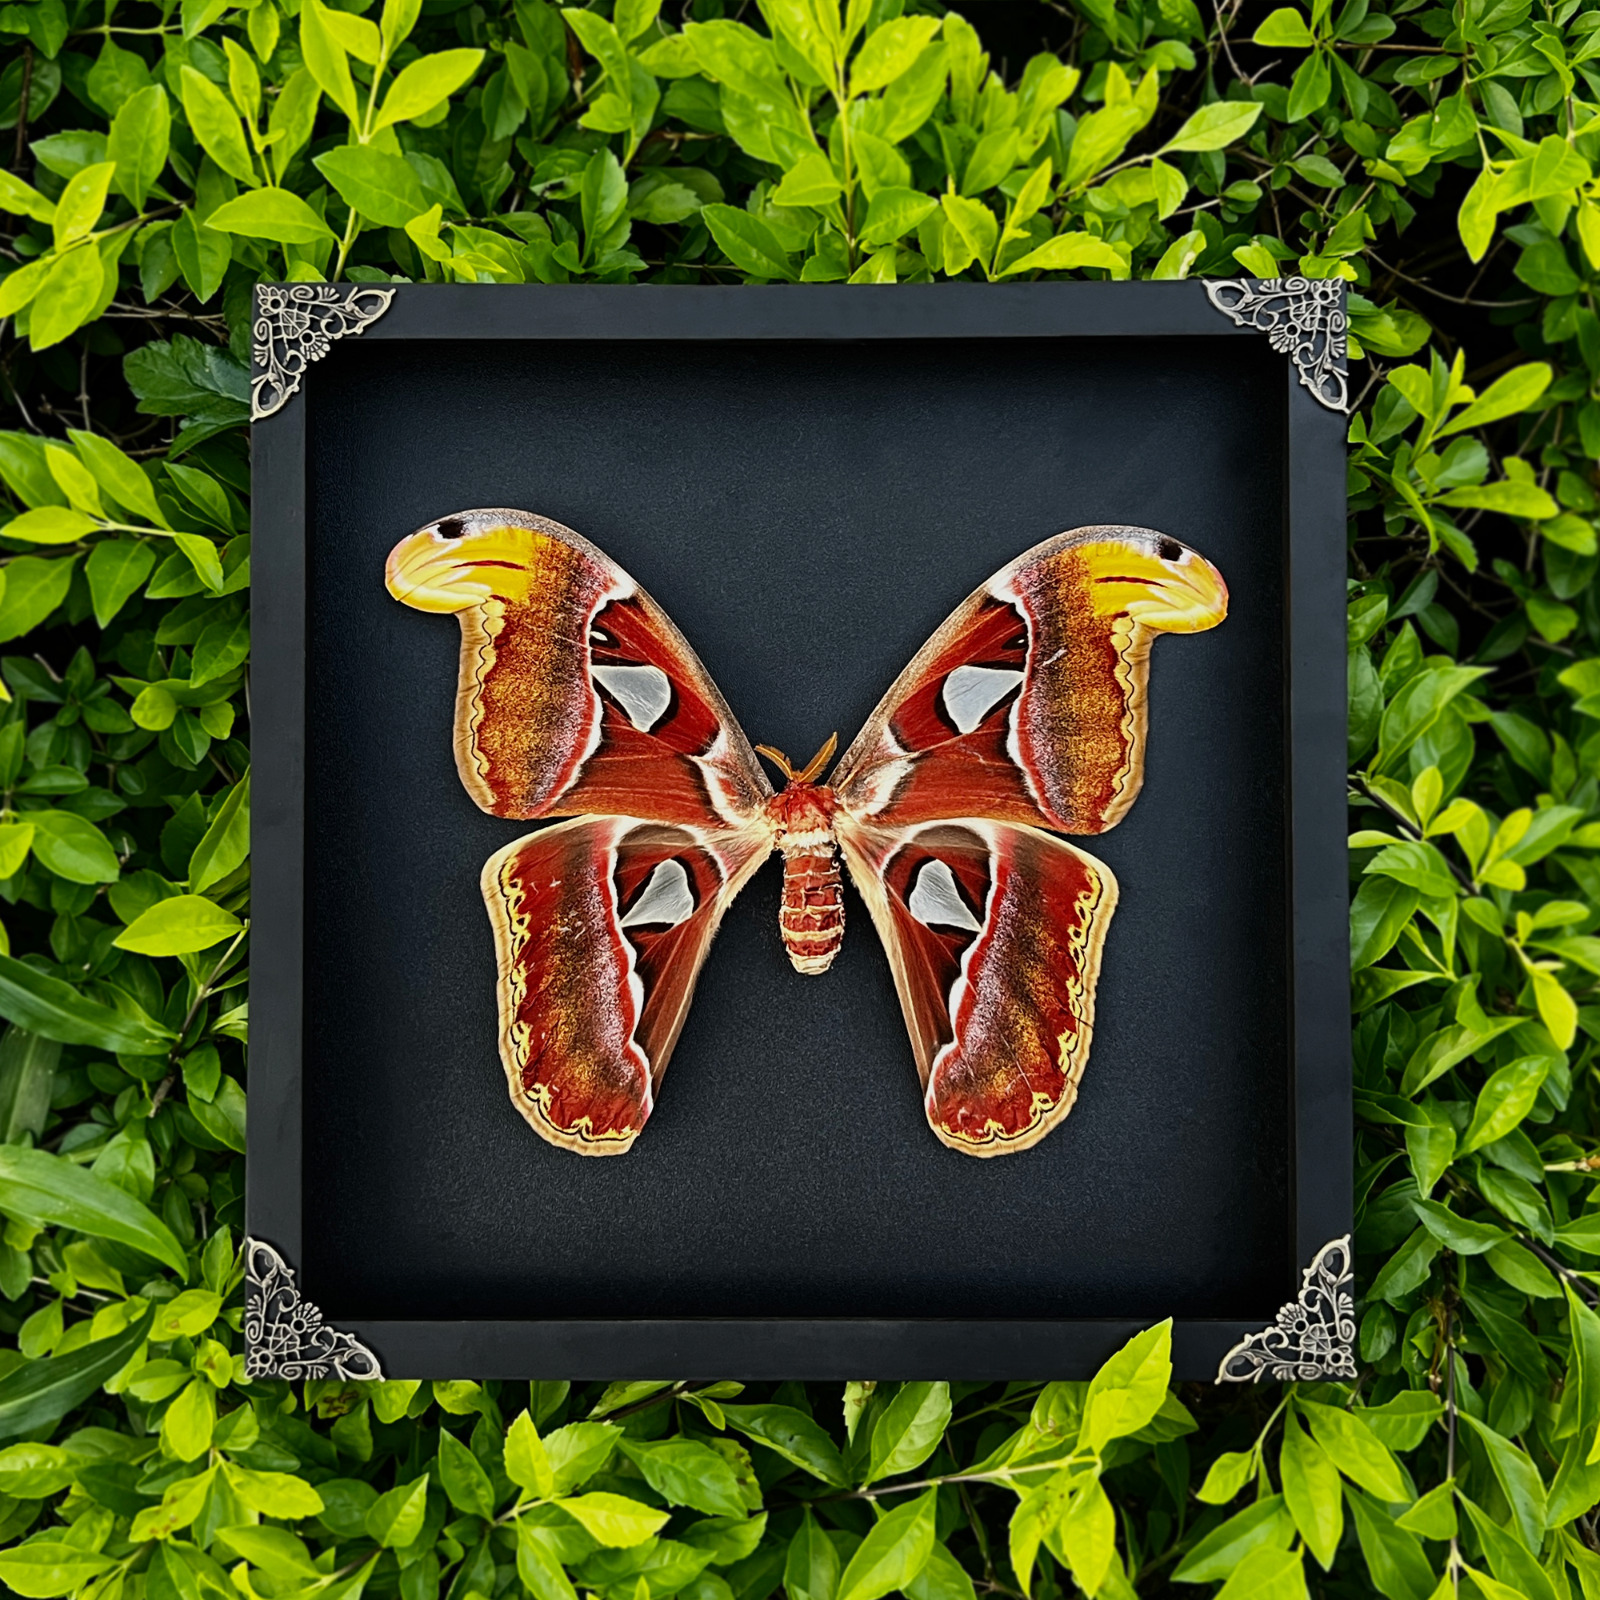 Atlas Moth Framed Handmade Wall Hanging Decor Taxidermy Dried Insect Artwork